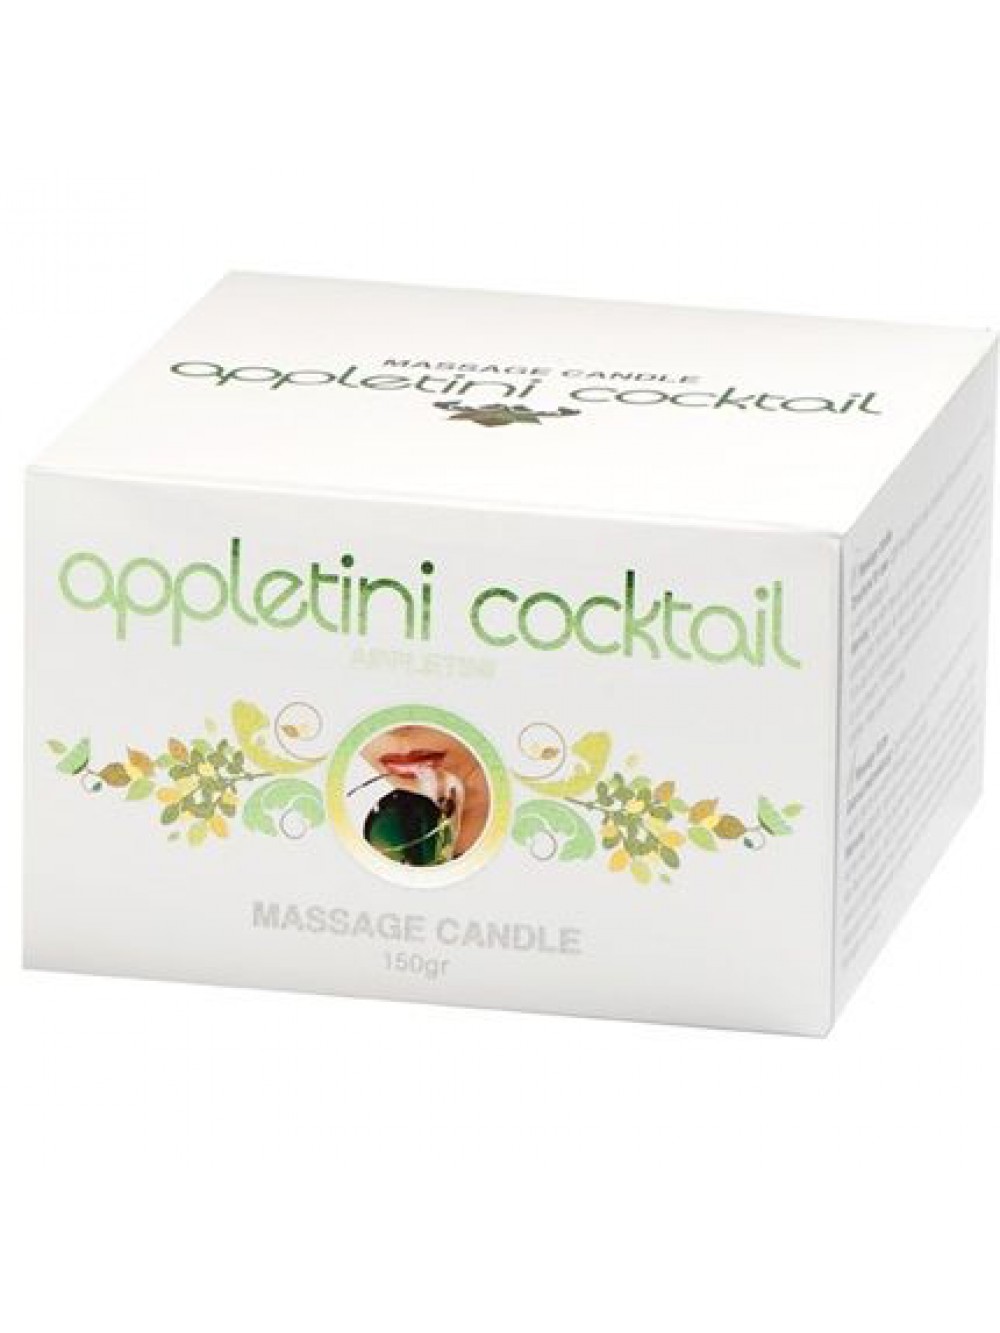 COBECO CANDLE APPLETINI COCKTAIL 150GR 8718546542459